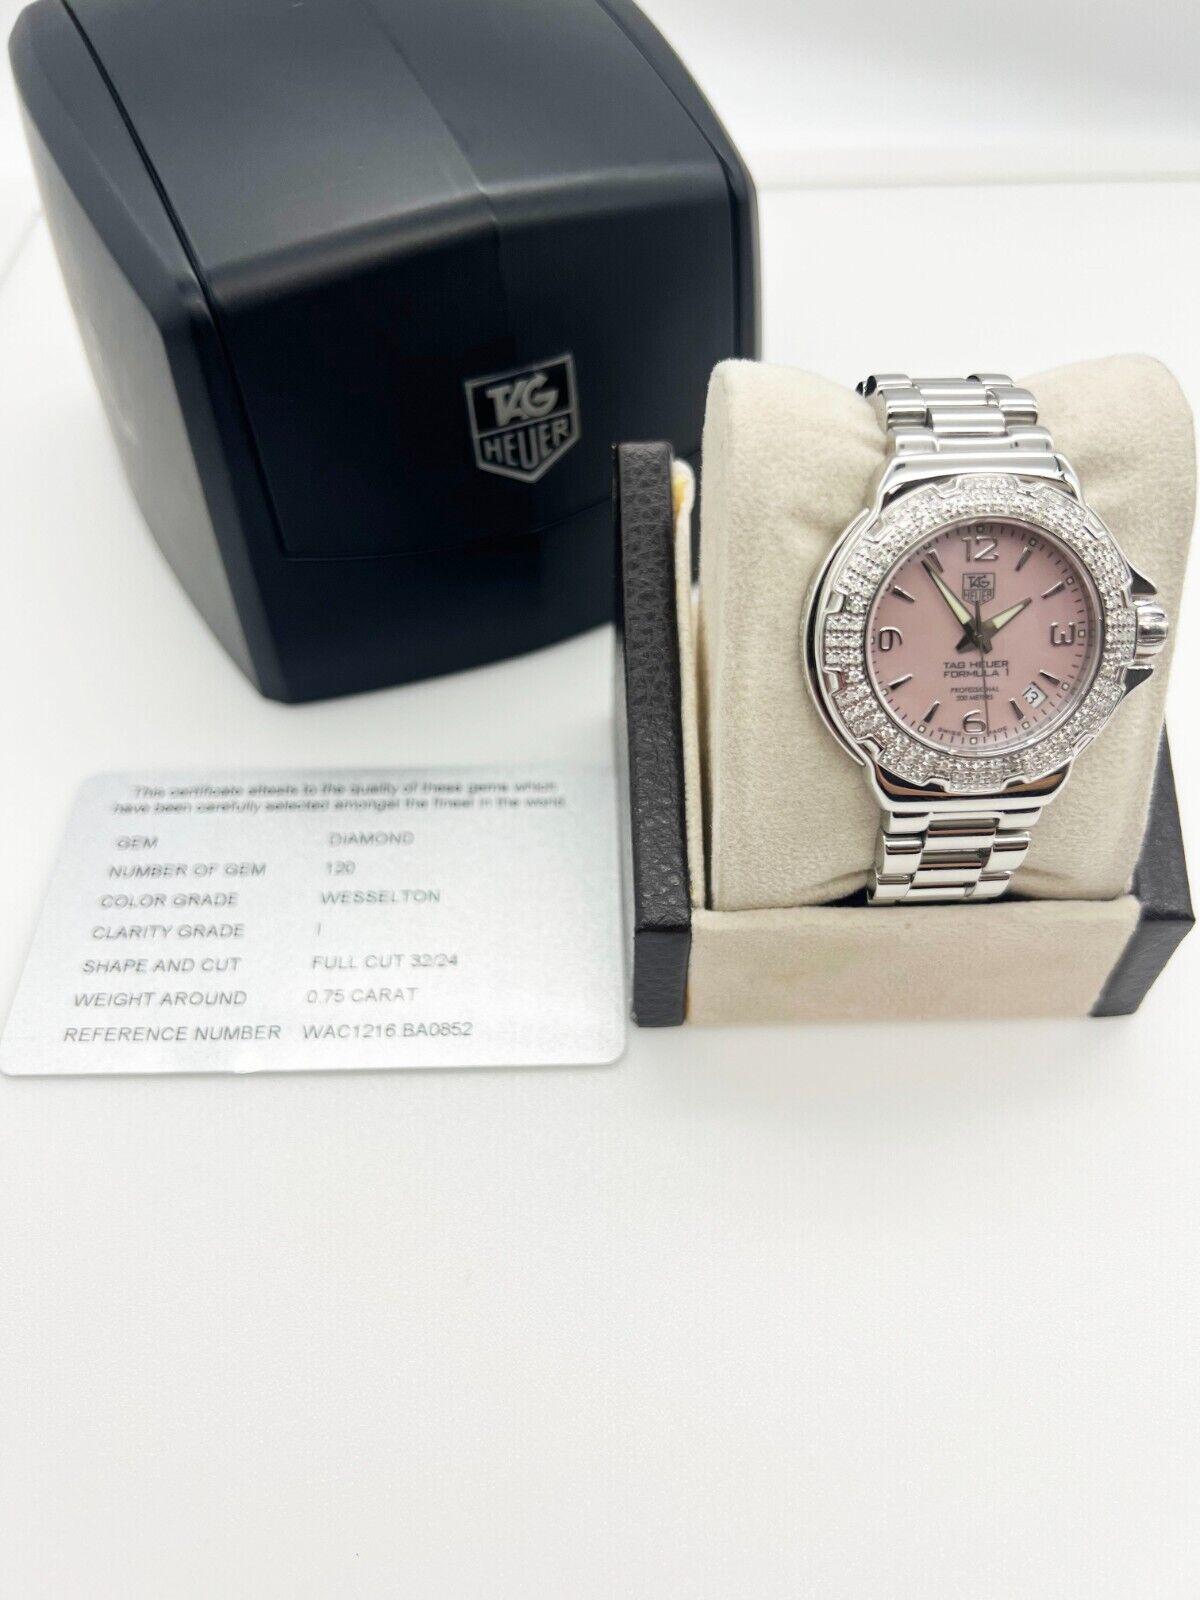 Style Number: WAC1214.BA0852 

Model: Formula One F1 

Case Material: Stainless Steel 

Band: Stainless Steel 

Bezel: Original Diamond Bezel  

Dial: Pink Mother of Pearl Dial 

Face: Sapphire Crystal - Crystal has a small blemish on it.  

Case